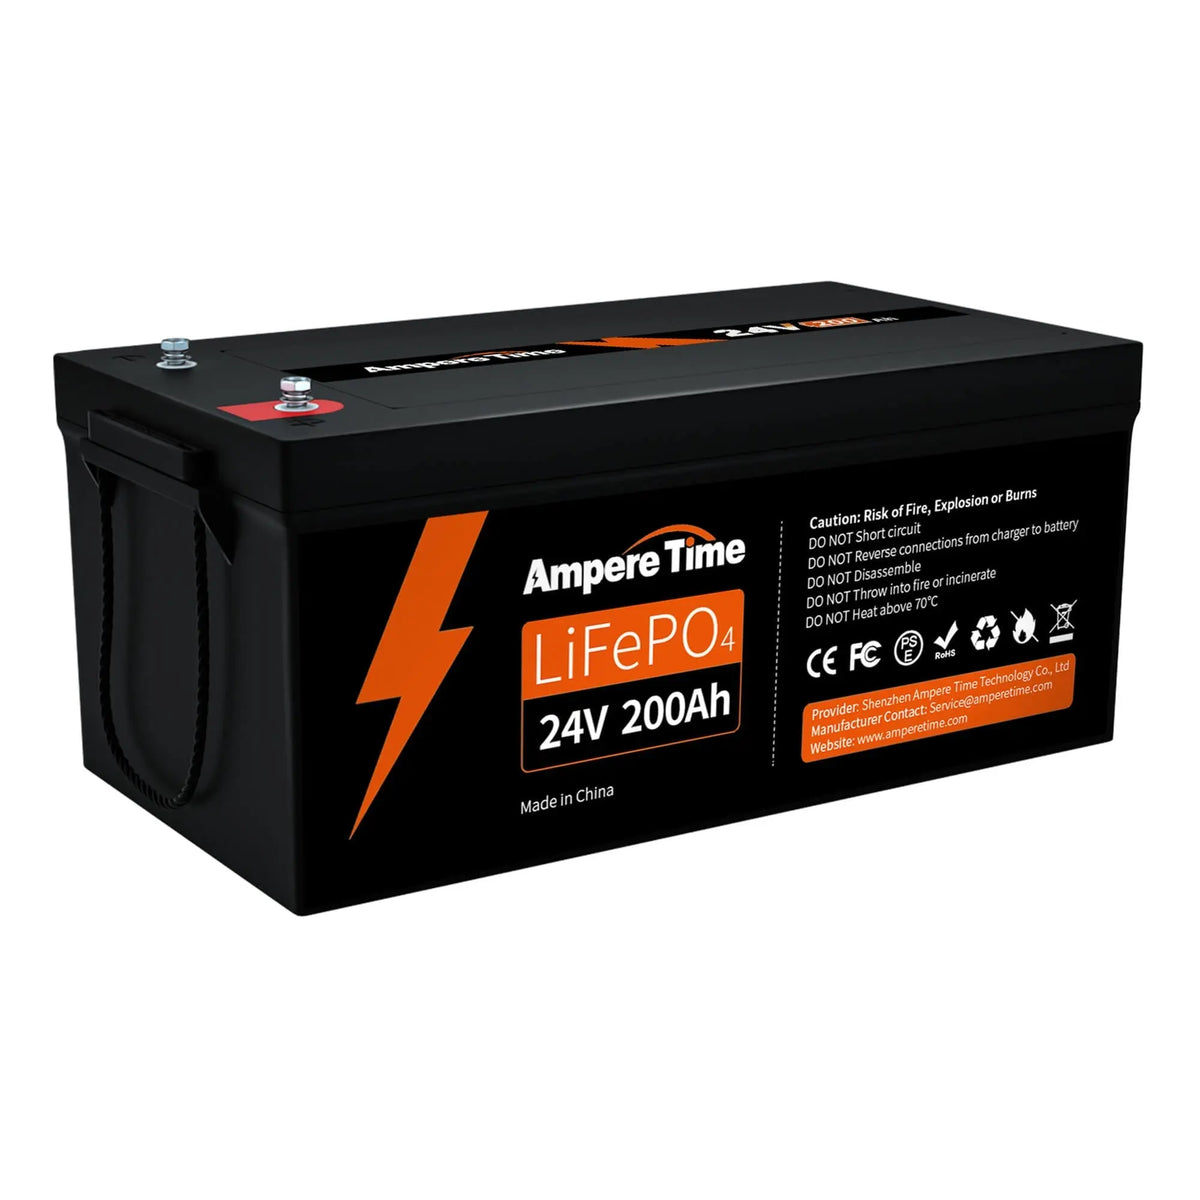 Litime 24V 200Ah Lithium Battery, 5120Wh LiFePO4 Battery with Built-in 200A  BMS, 4000-15000 Cycles & 10 Years Lifetime, Max. 5120W Load Power Perfect